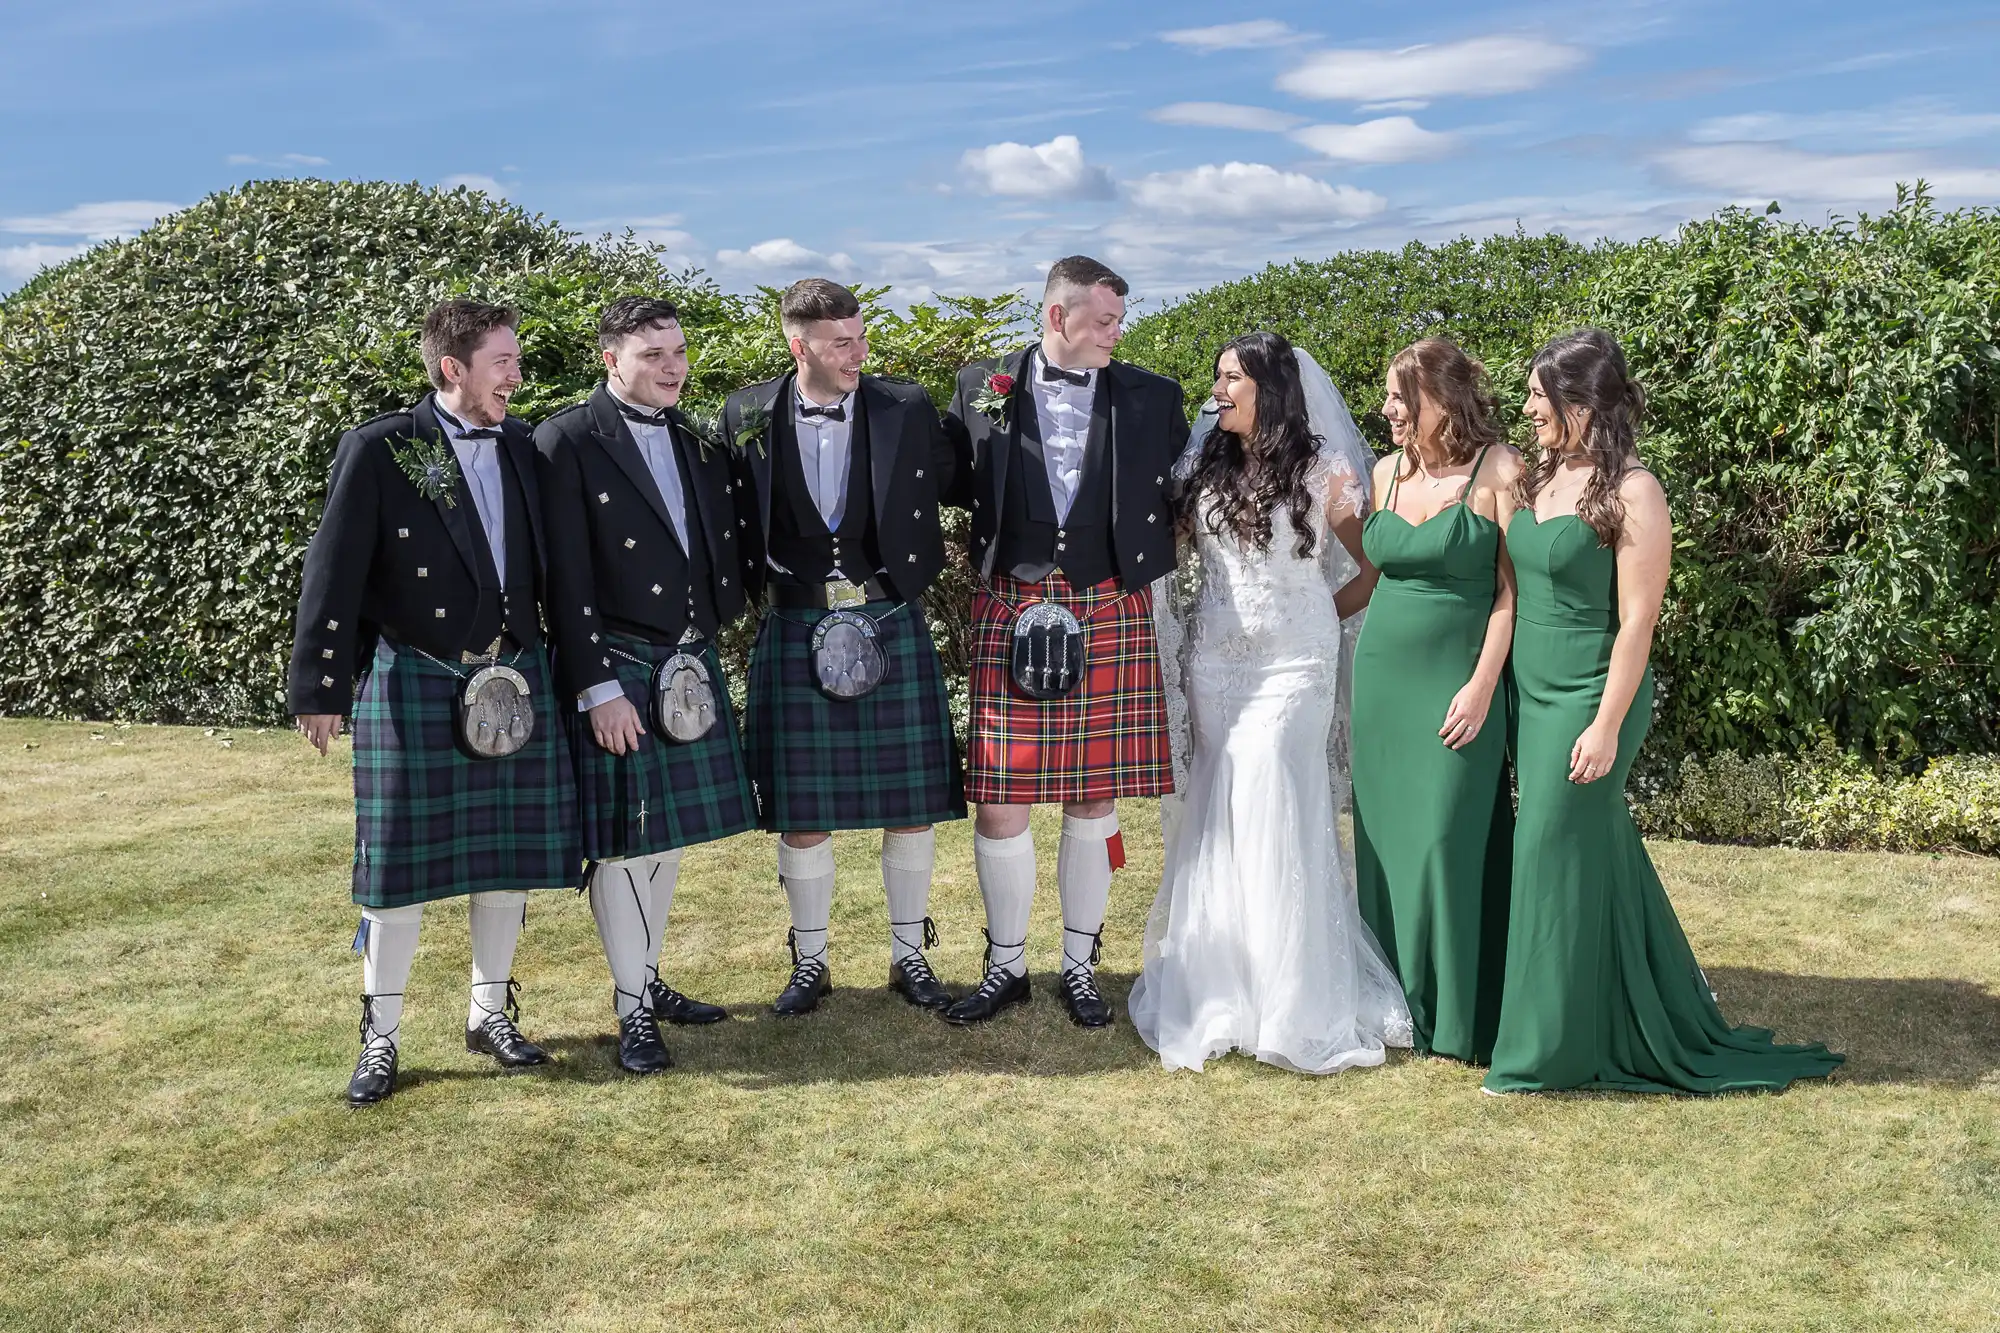 A bride in a white dress and groom in a tartan kilt with four groomsmen and two bridesmaids, all smiling in a lush garden.